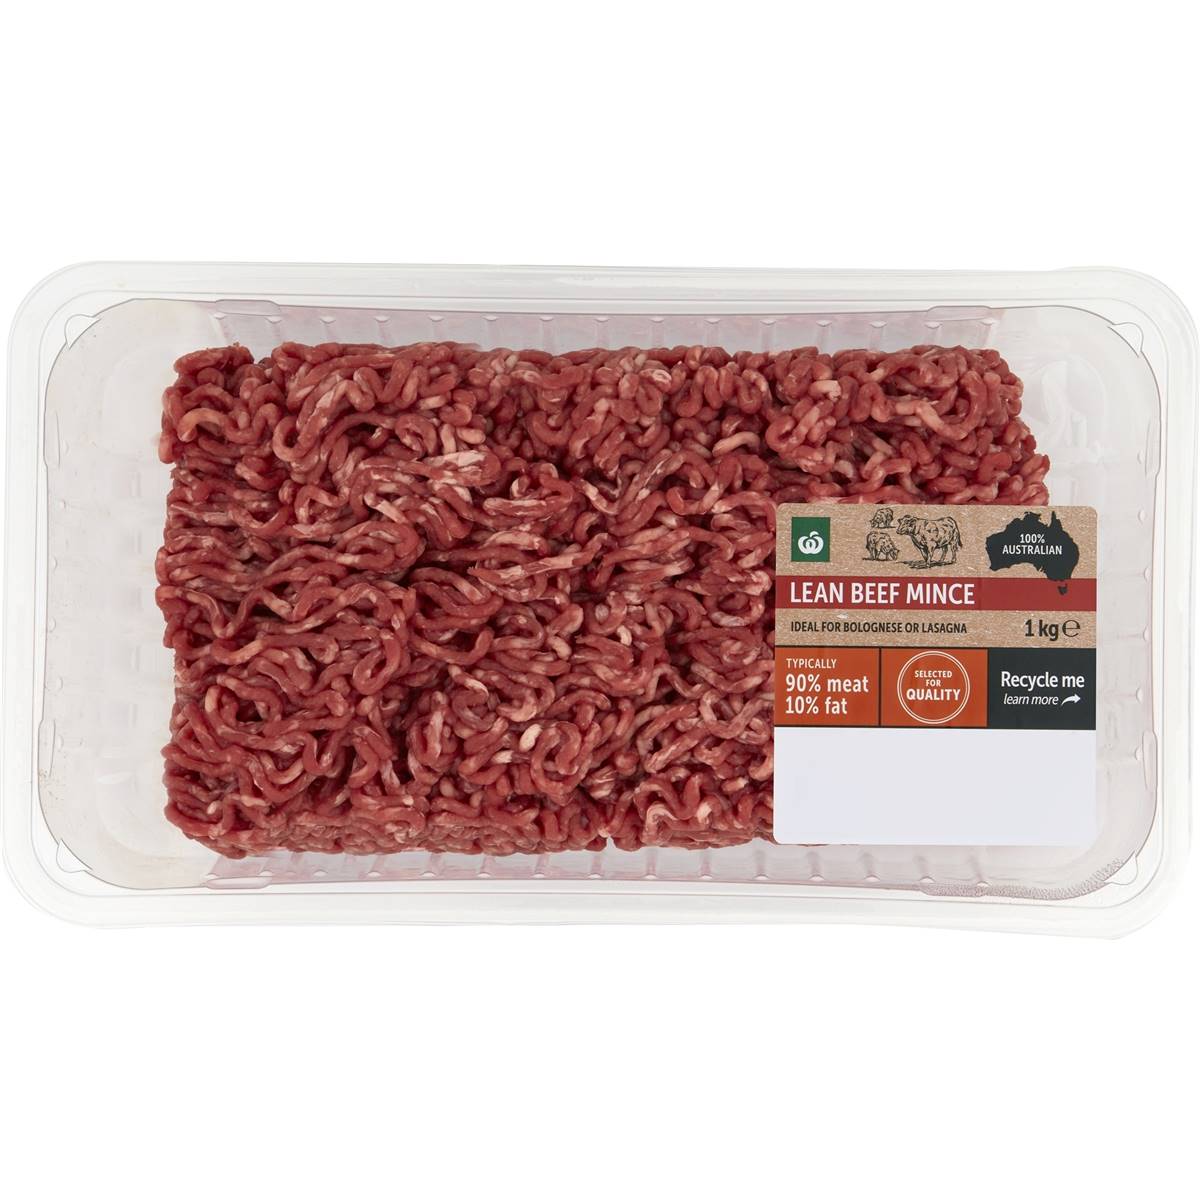 Calories in Woolworths Lean Beef Mince calcount